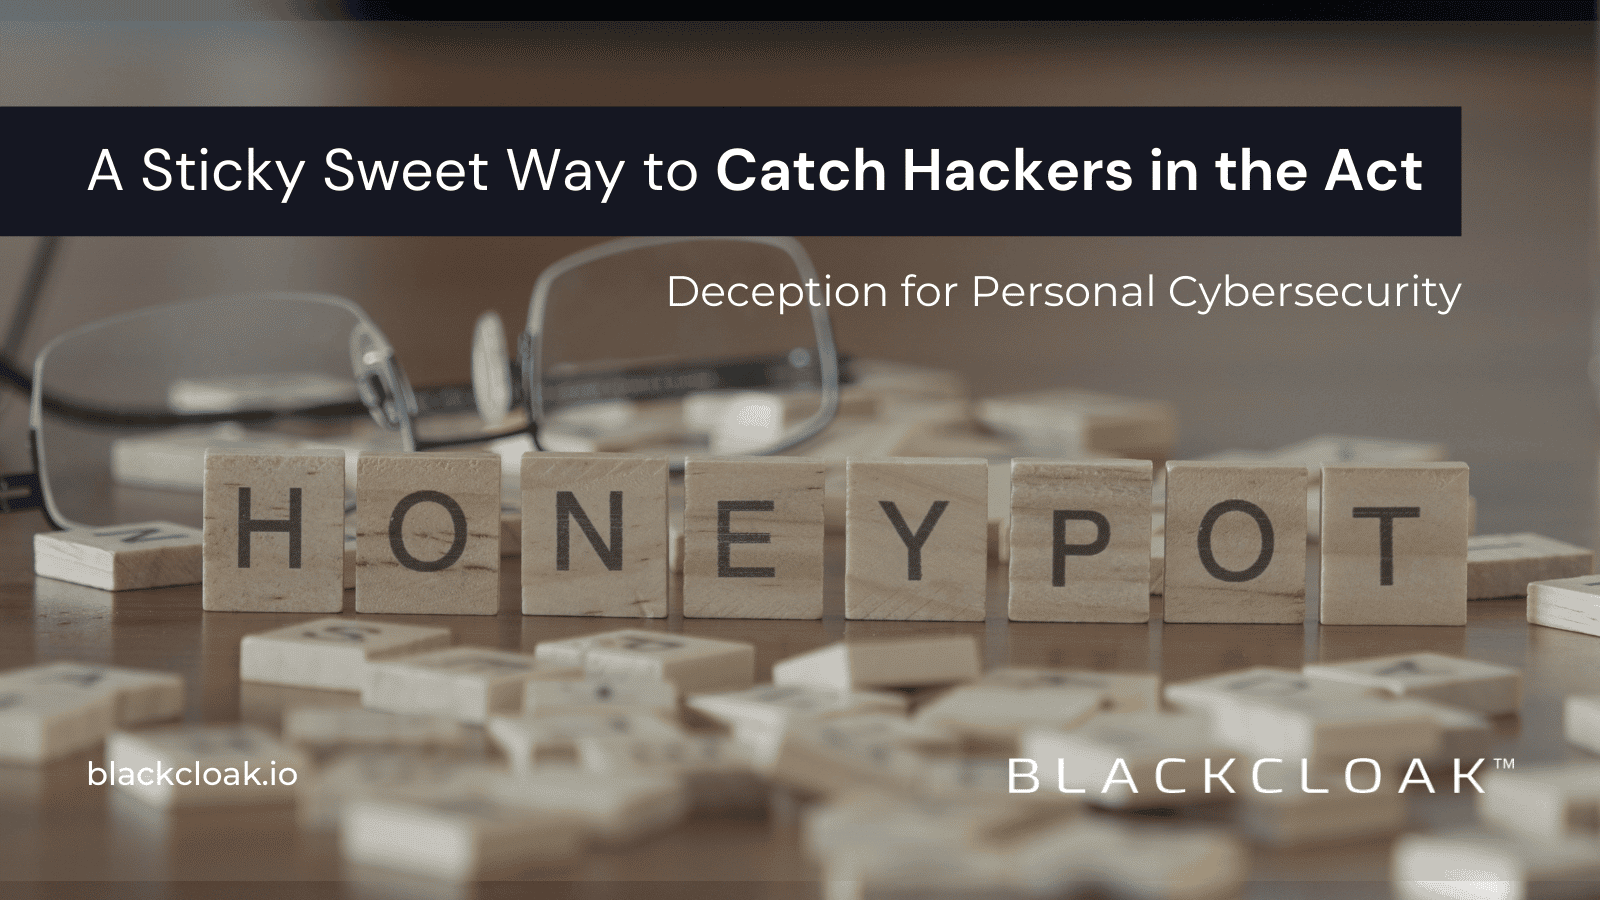 A Sticky Sweet Way to Catch Hackers in the Act: Honeypot cyberattacks